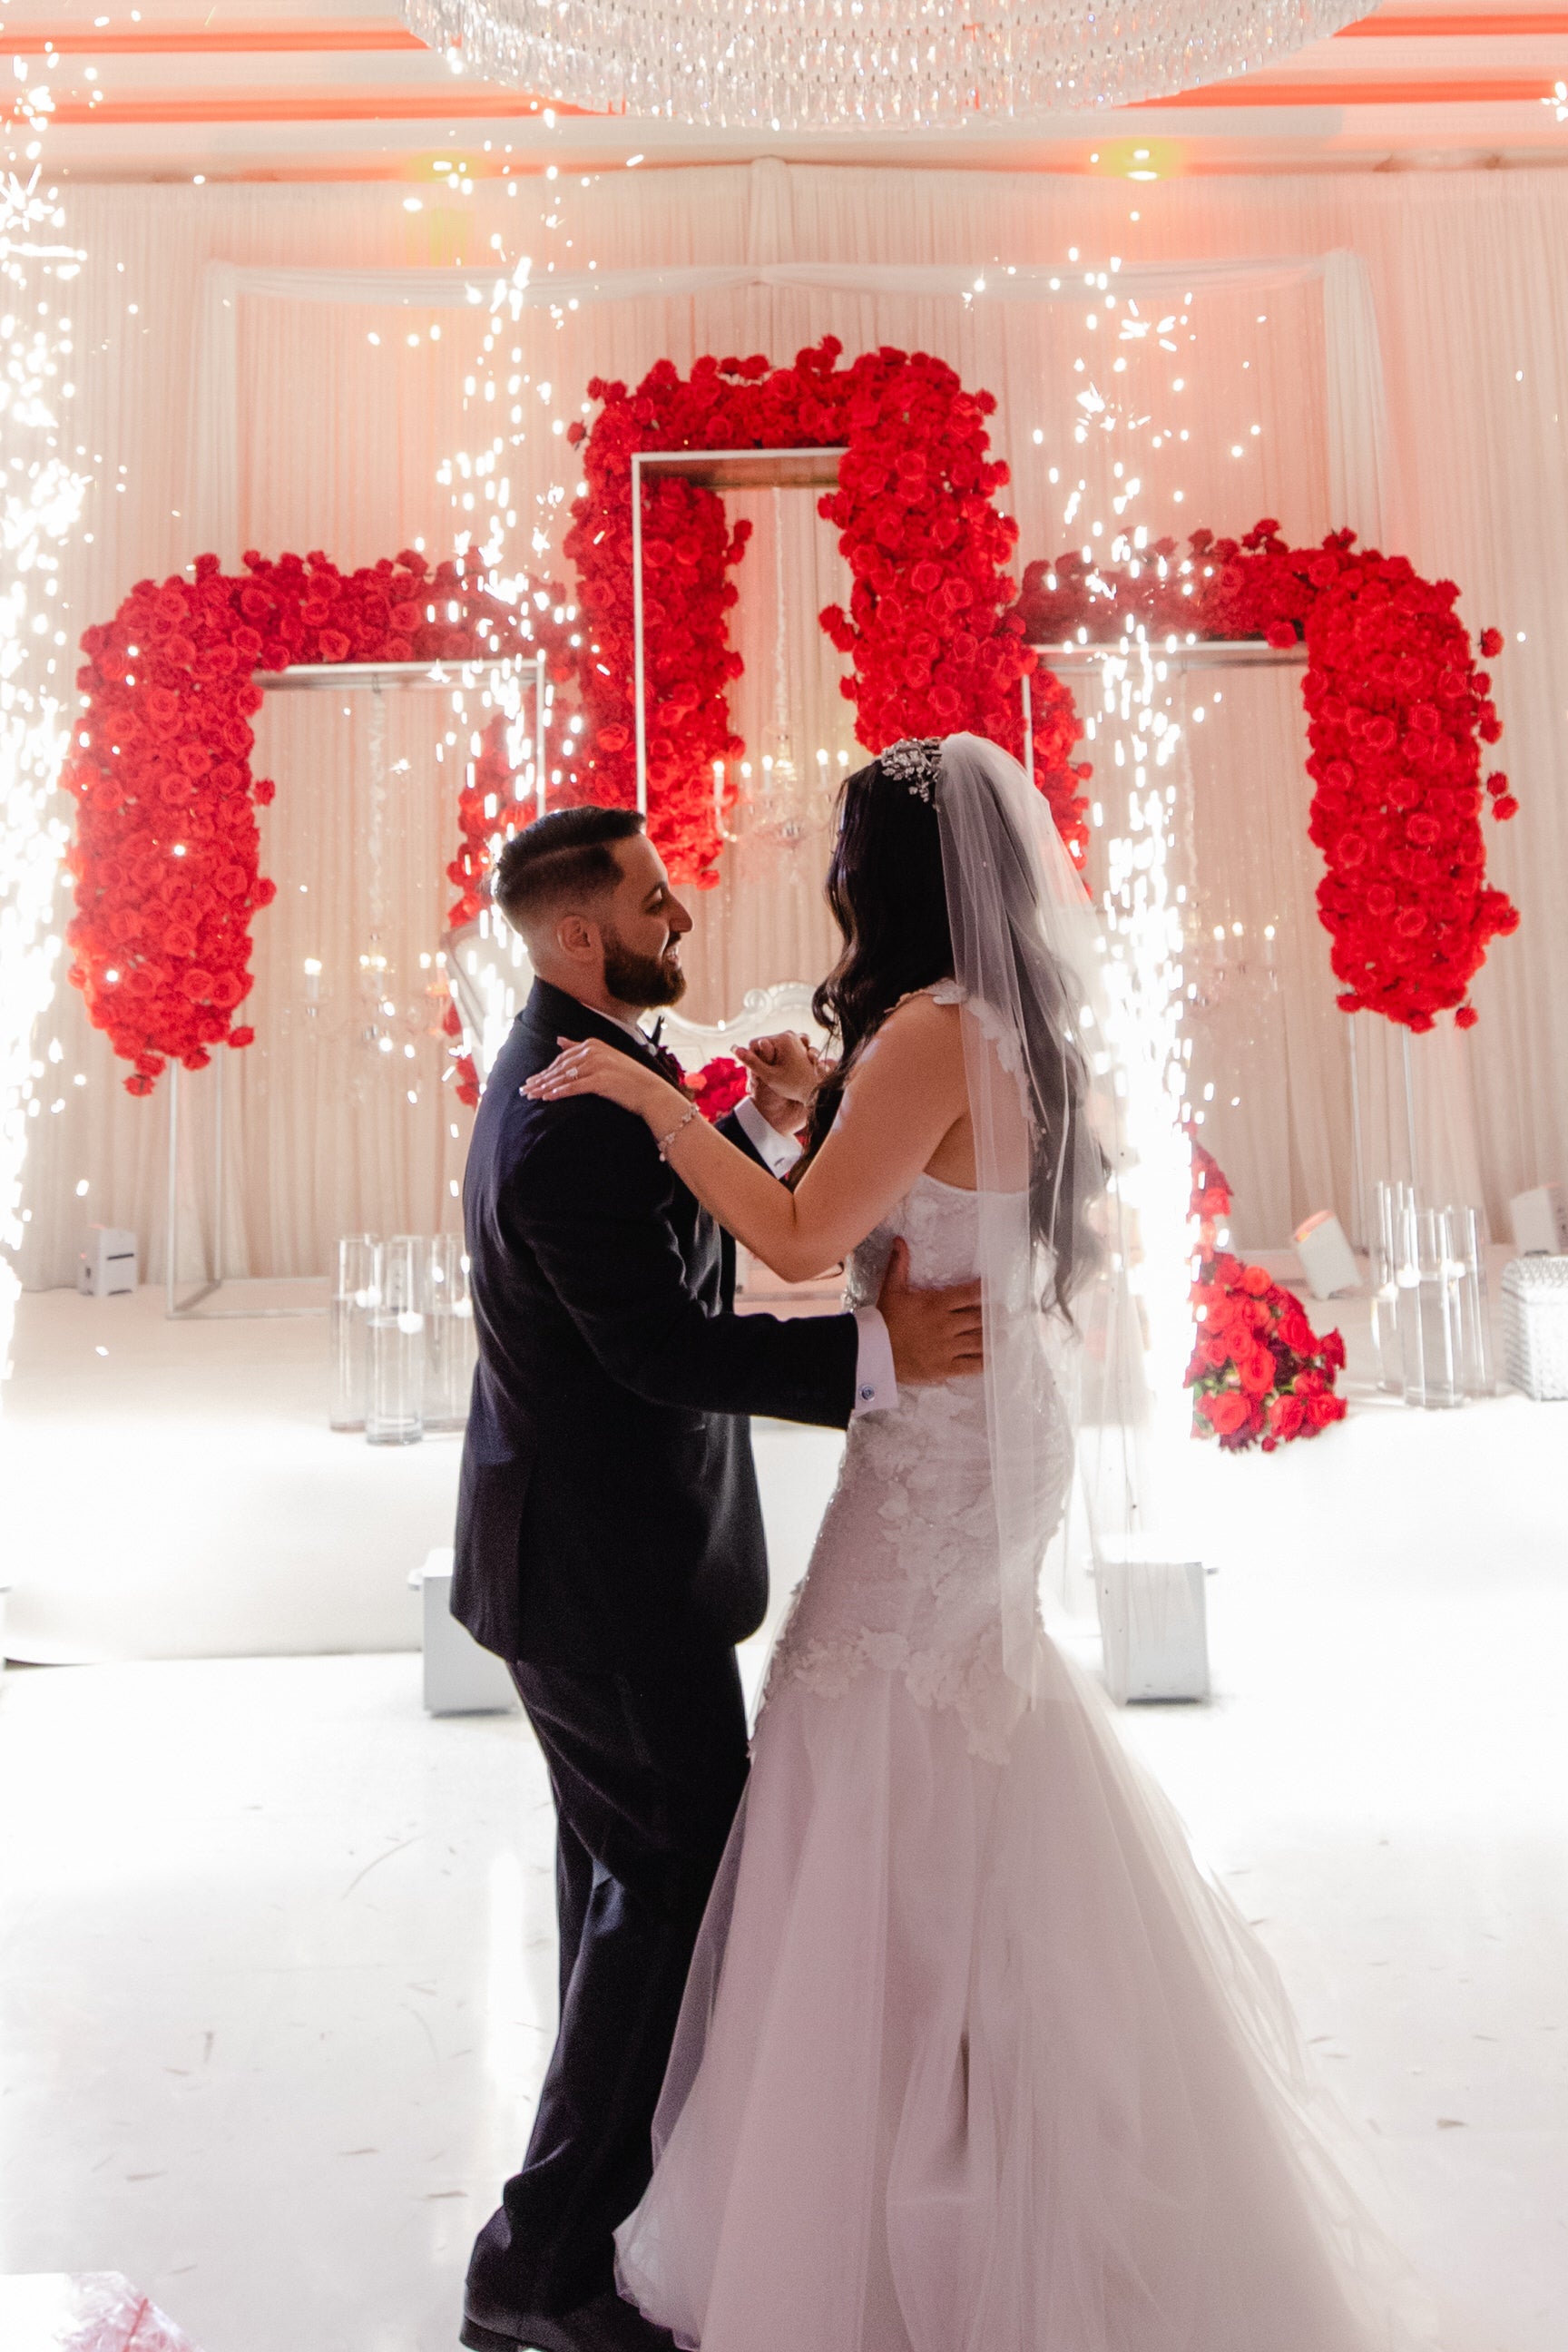 Persian couple with bride wearing fingertip length rhinestone wedding veil in downdo hairstyle with red rose arches in background